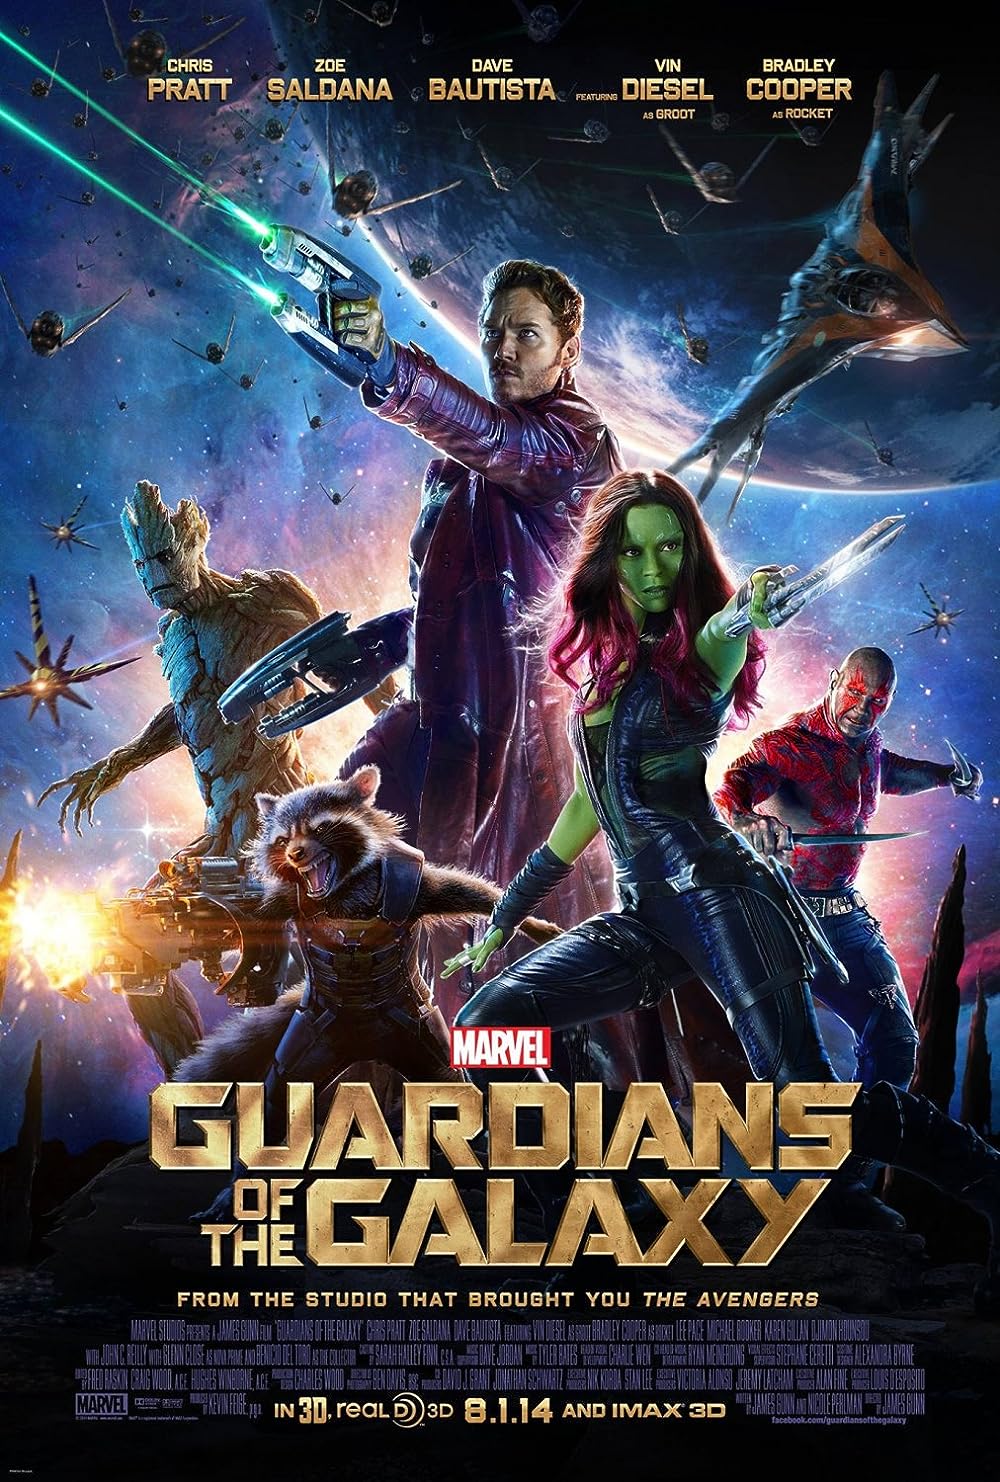 Guardians of the Galaxy (August 1, 2014) - Embark on a cosmic adventure with a band of unlikely heroes as they join forces to save the galaxy from the power-hungry Ronan the Accuser.